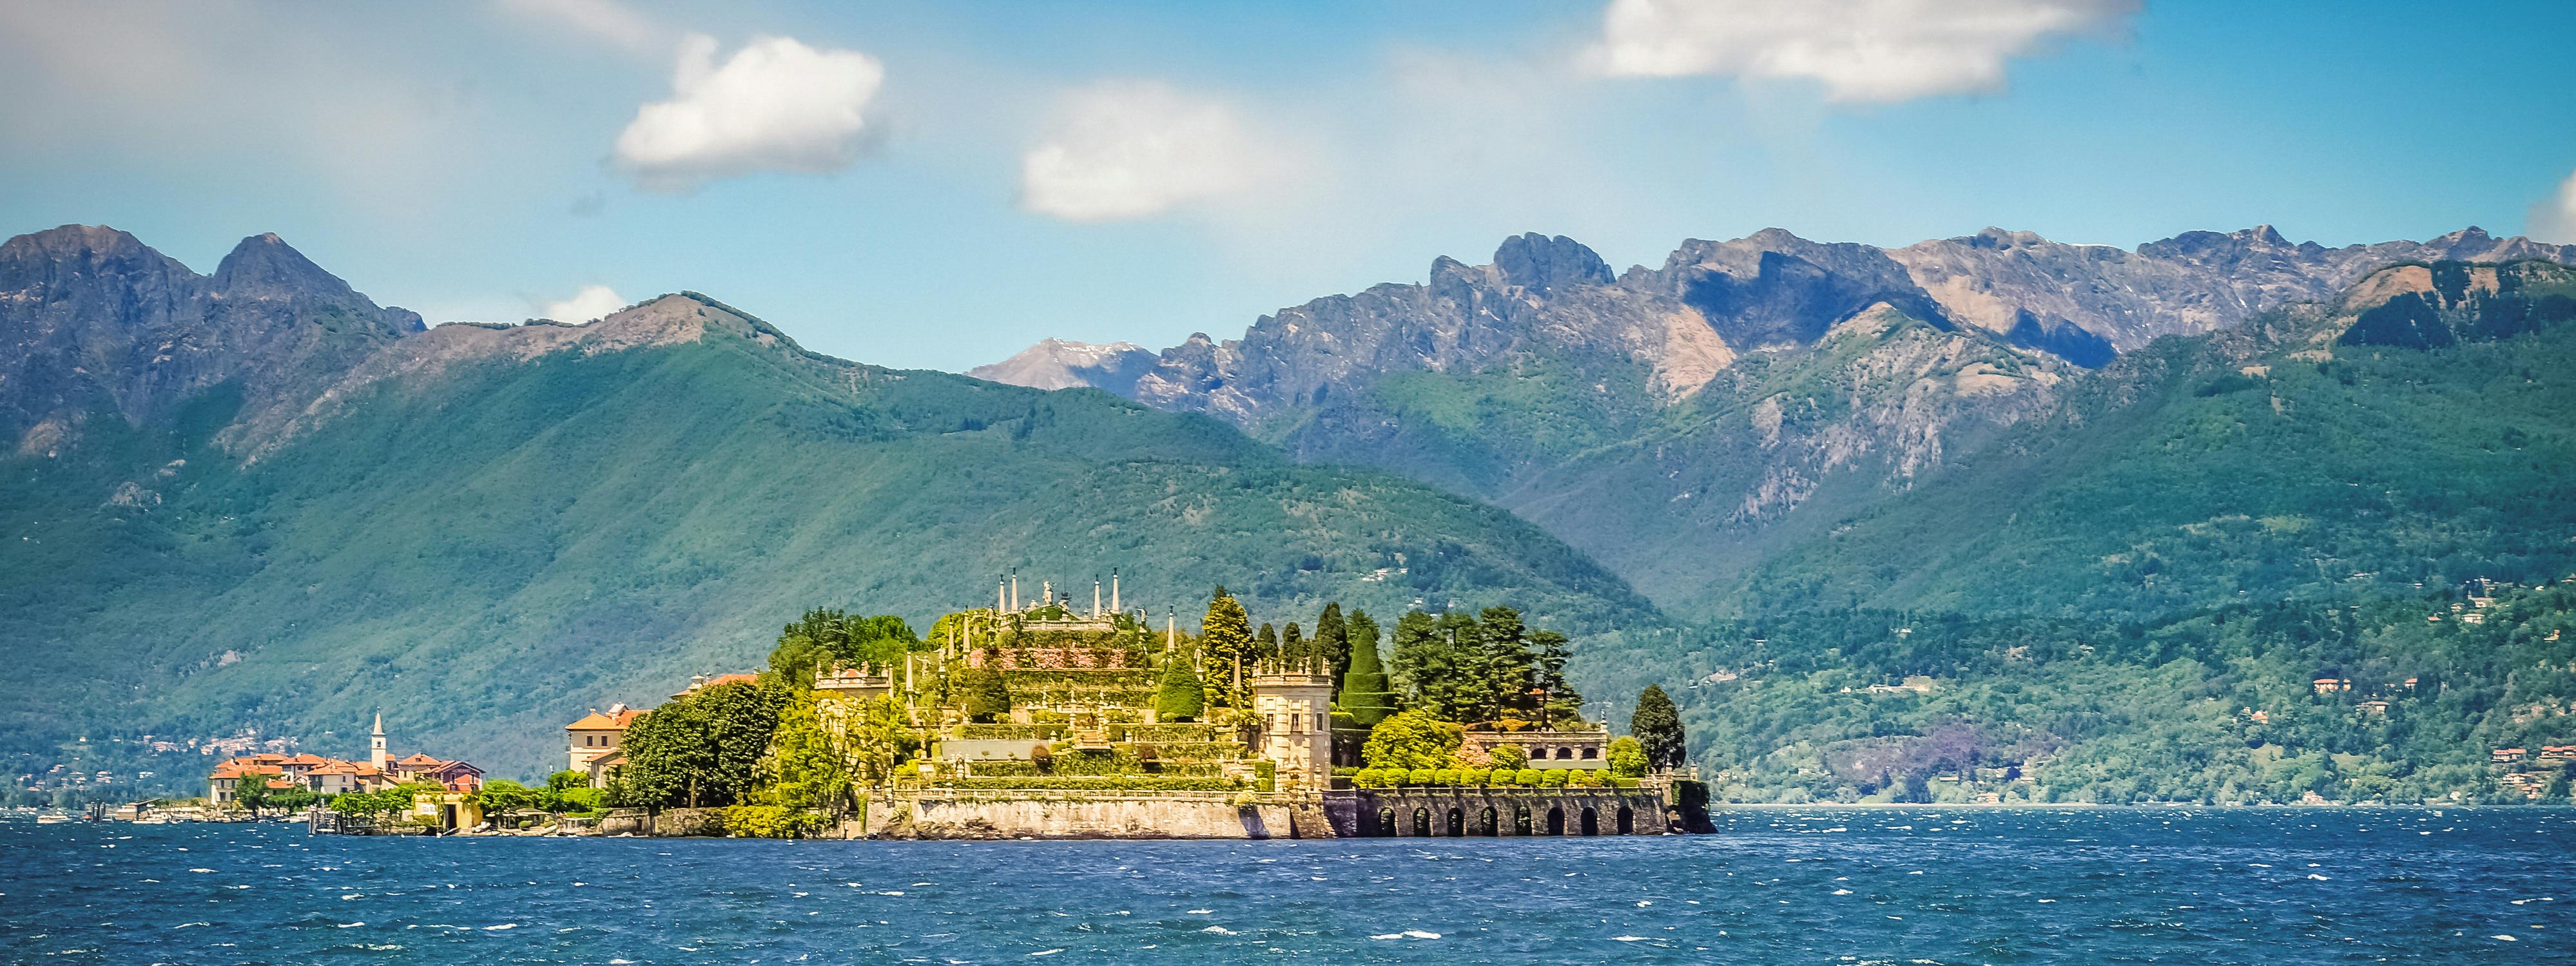 Navigation service from Stresa to Isola Madre, Isola Pescatori and Isola Bella